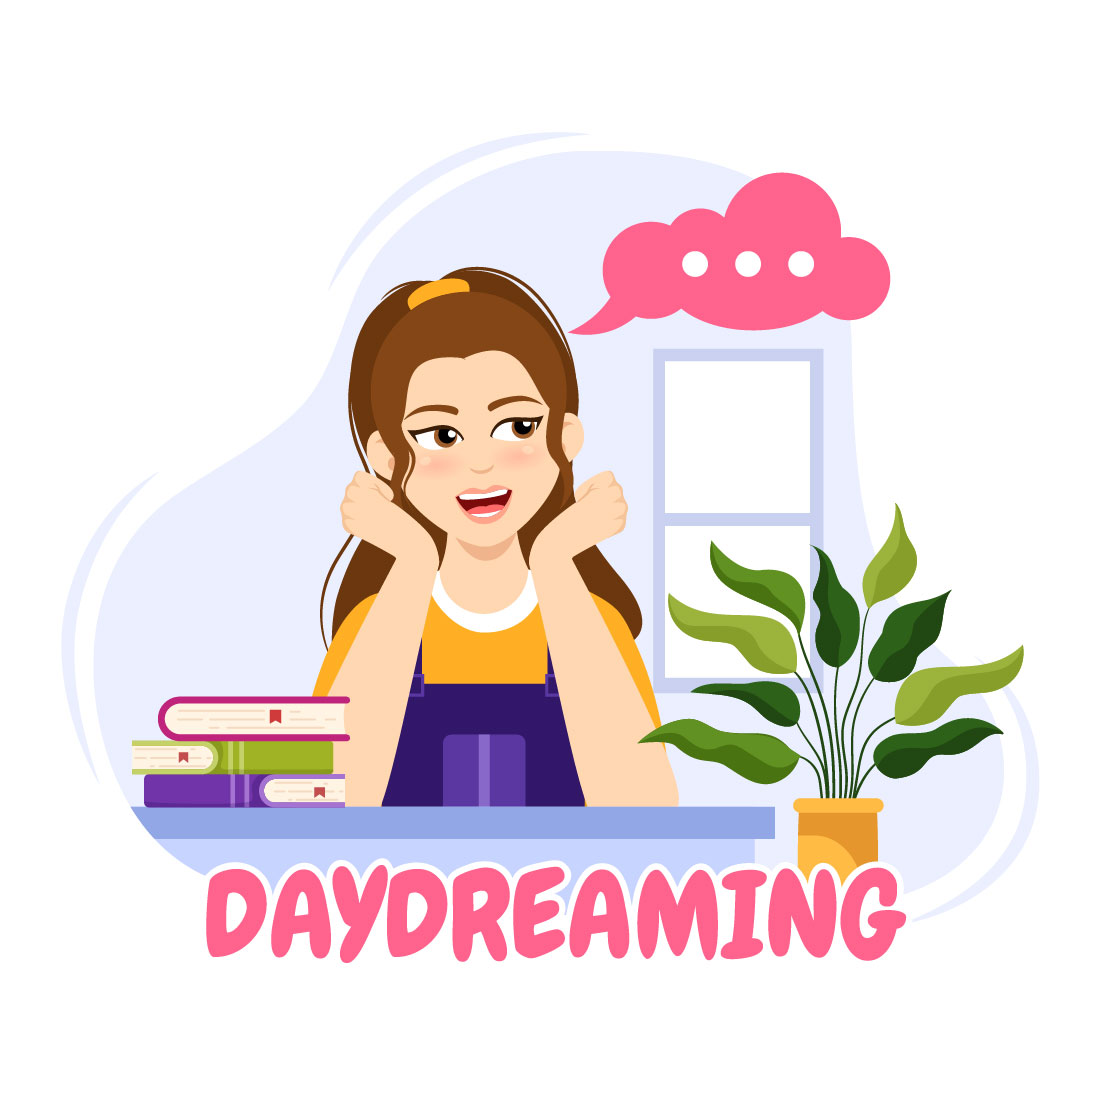 11 People Daydreaming Illustration cover image.